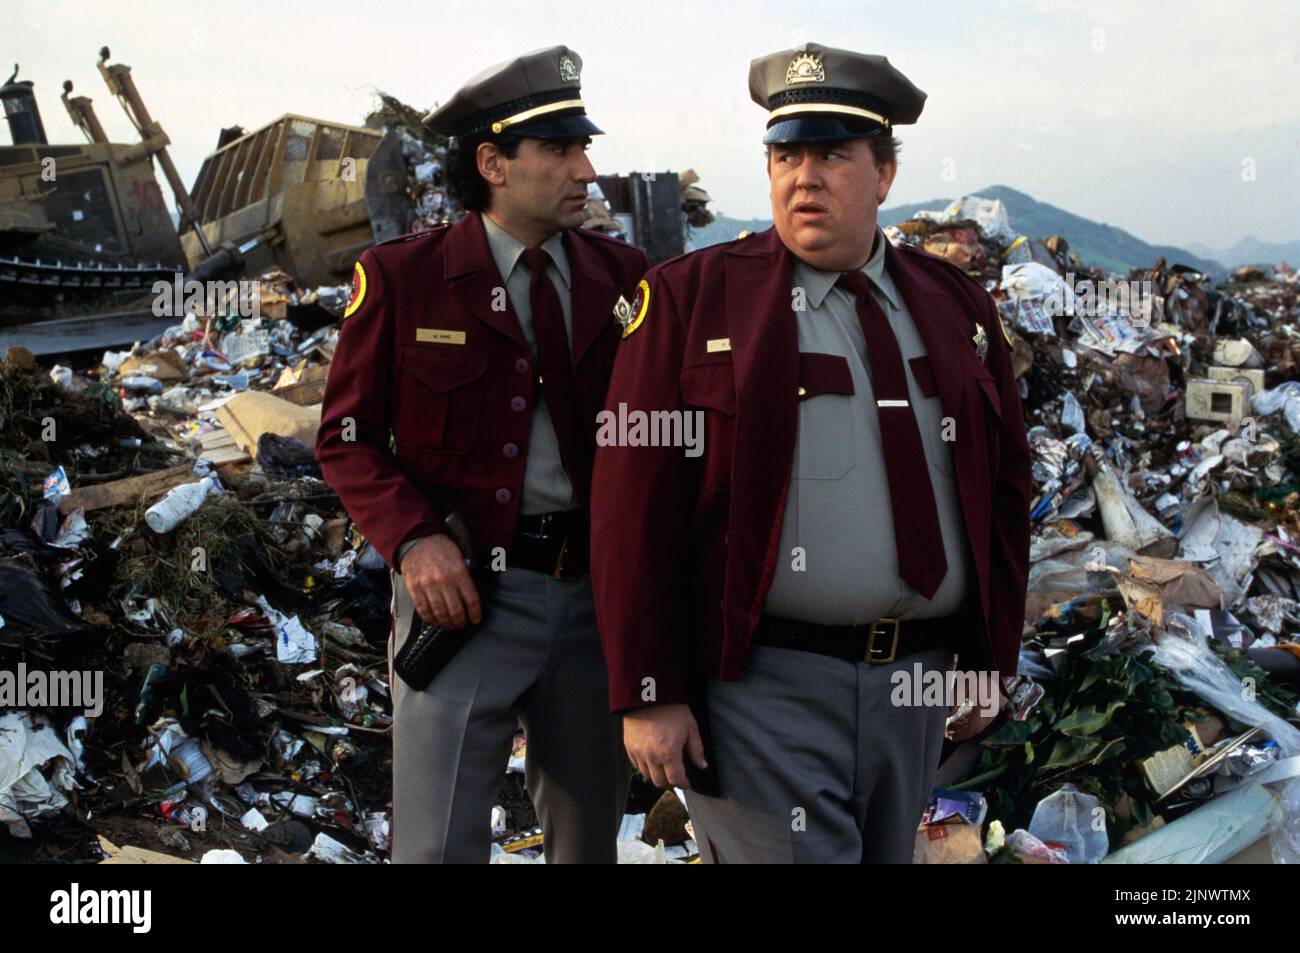 EUGENE LEVY and JOHN CANDY in ARMED AND DANGEROUS (1986), directed by MARK L. LESTER. Credit: COLUMBIA PICTURES / Album Stock Photo